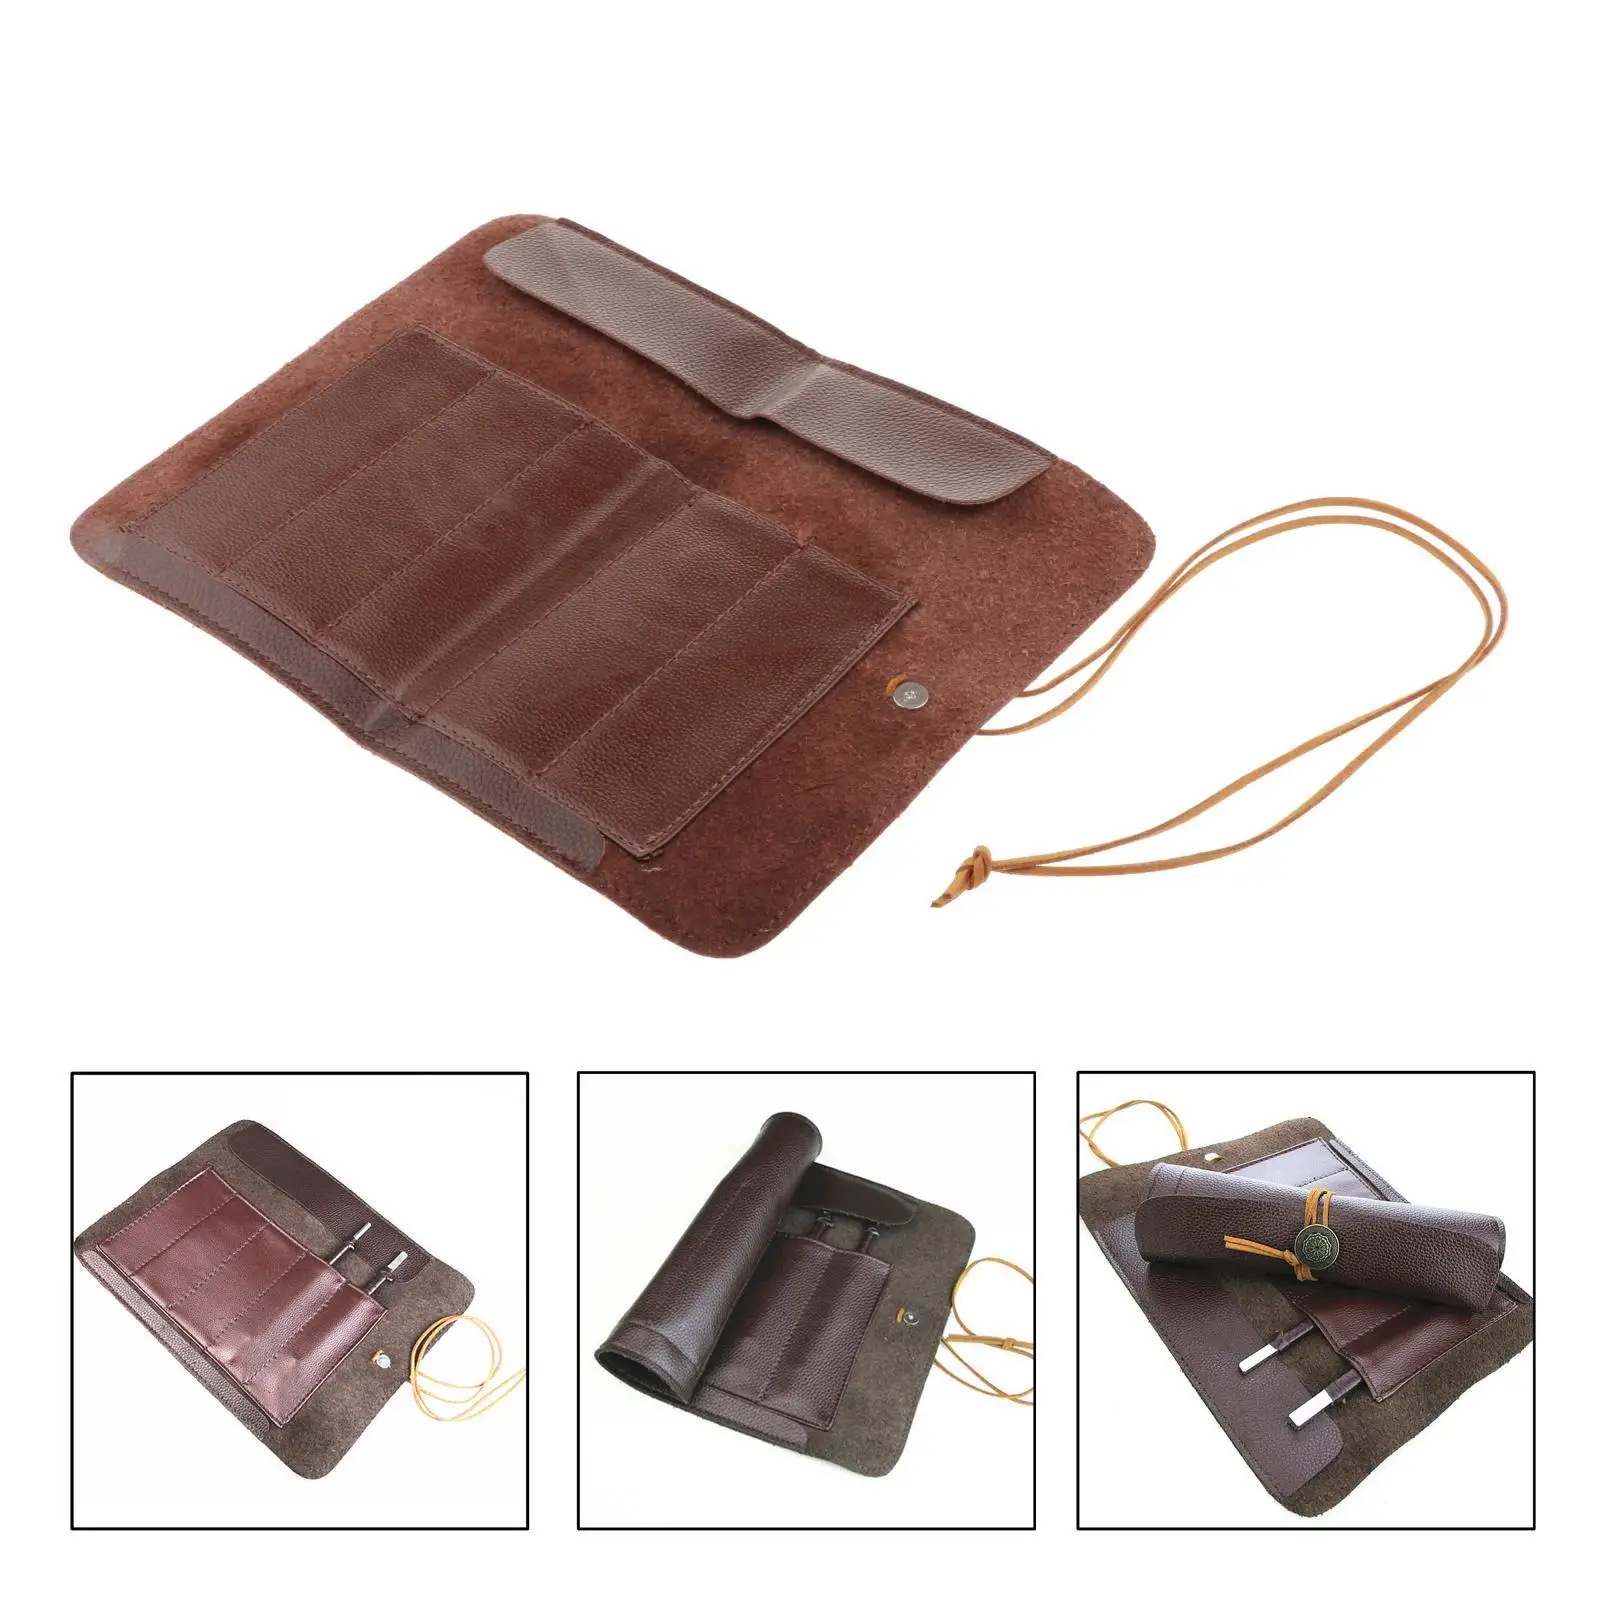 Knife Roll Bag PU Leather, Knife Roll Bag, Portable Travel Tool Roll Bag for